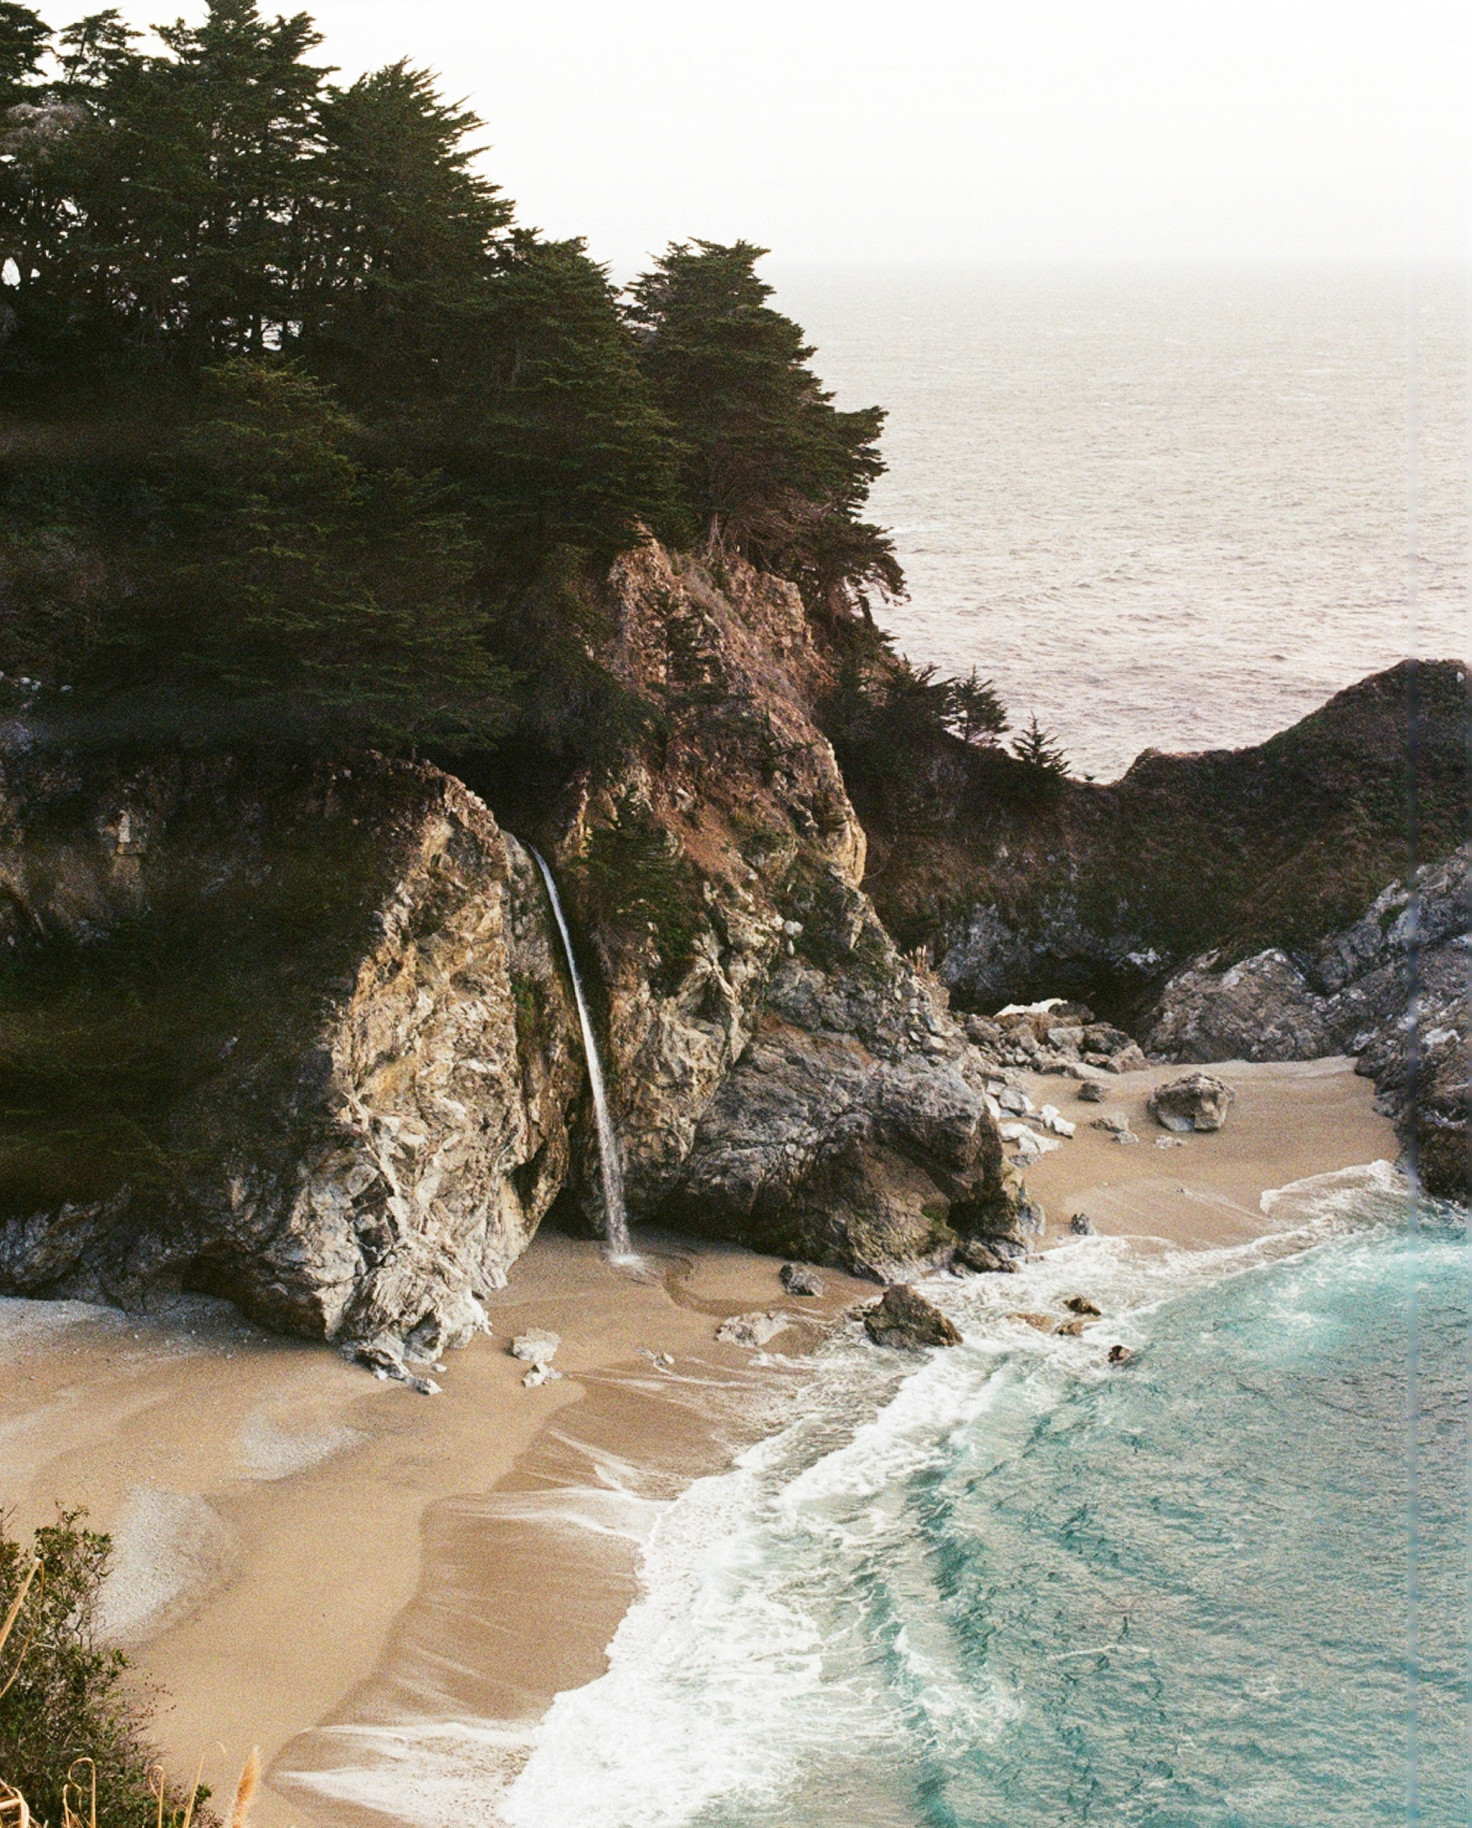 Big sur beach from above.